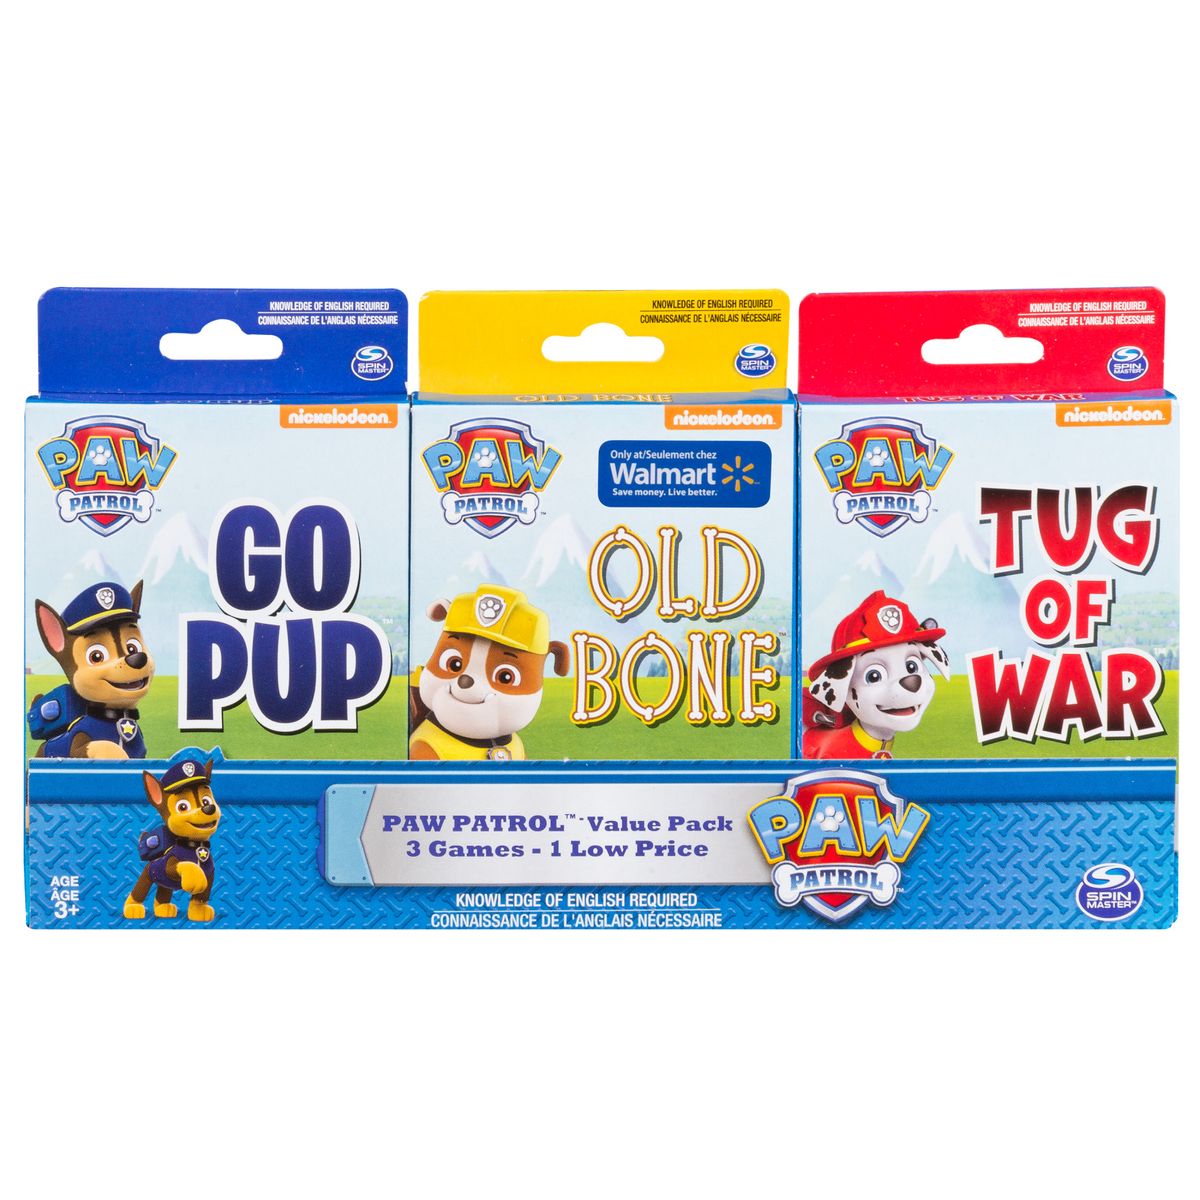 [RDY] [送料無料] Spin Master Games - Paw Patrol - Playing Cards - Value Pack [楽天海外通販] | Spin Master Games - Paw Patrol - Playing Cards - Value Pack